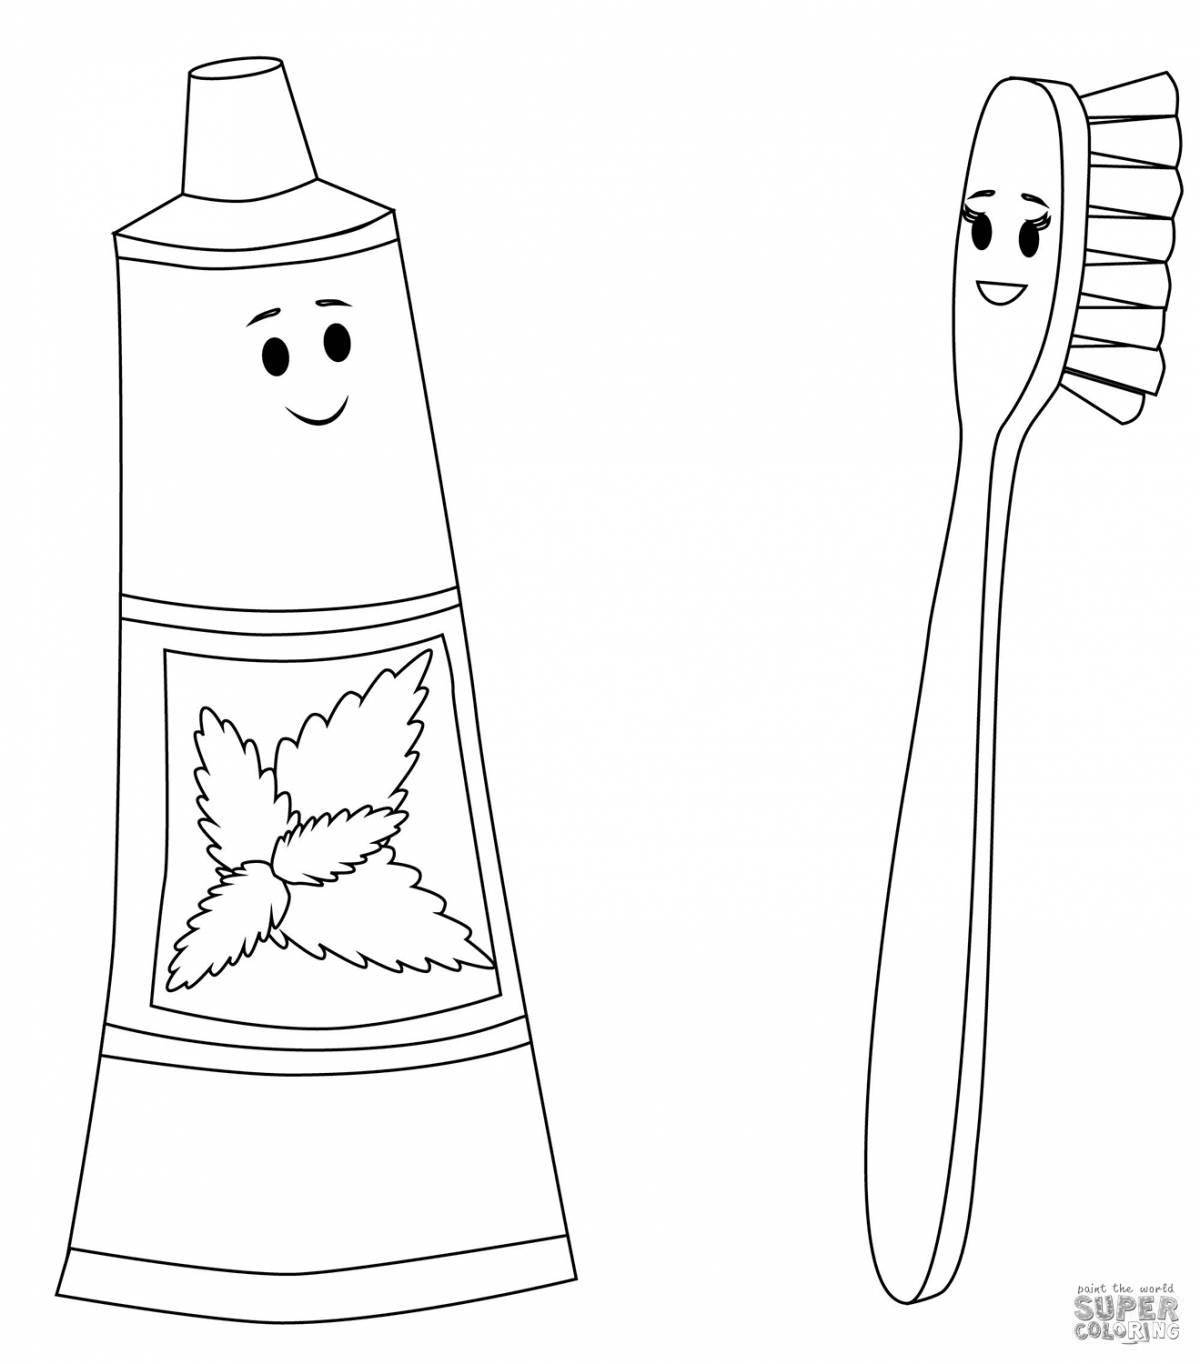 Glittering Toothbrush and Paste Coloring Page